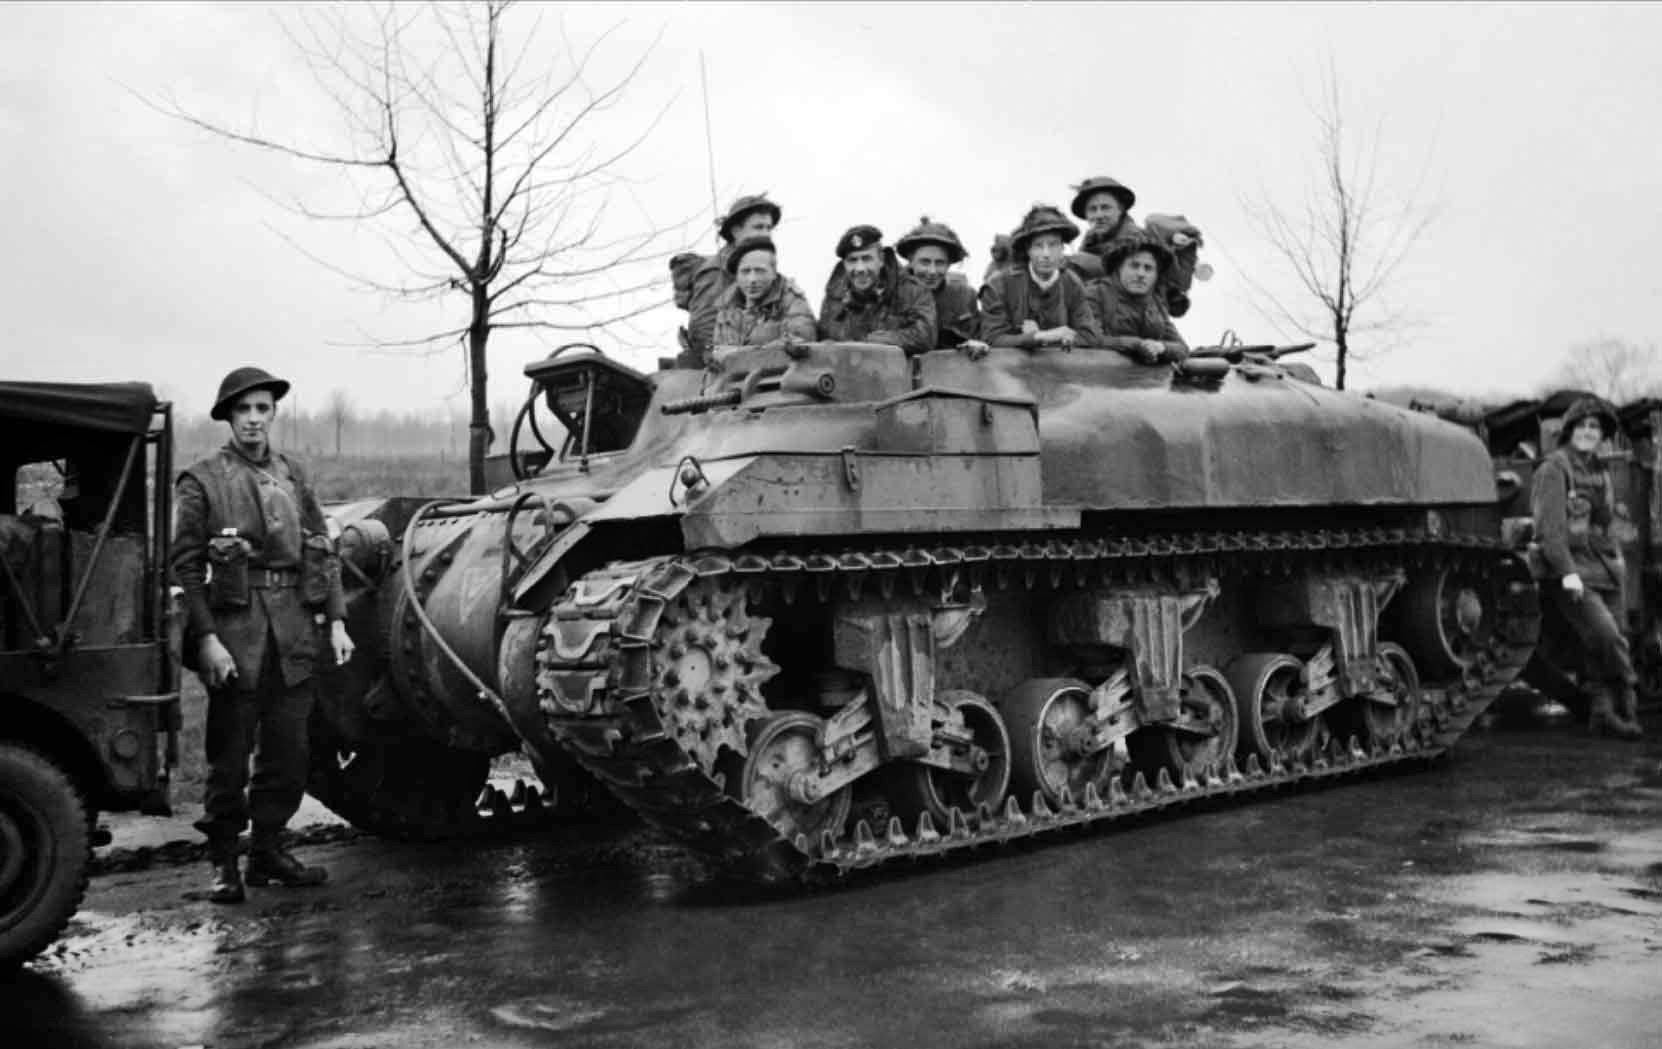 Soldiers of the 53rd Welsh Division are riding in a Kangaroo personnel carrier manufactured from the modified chassis of the M4 Sherman medium tank.